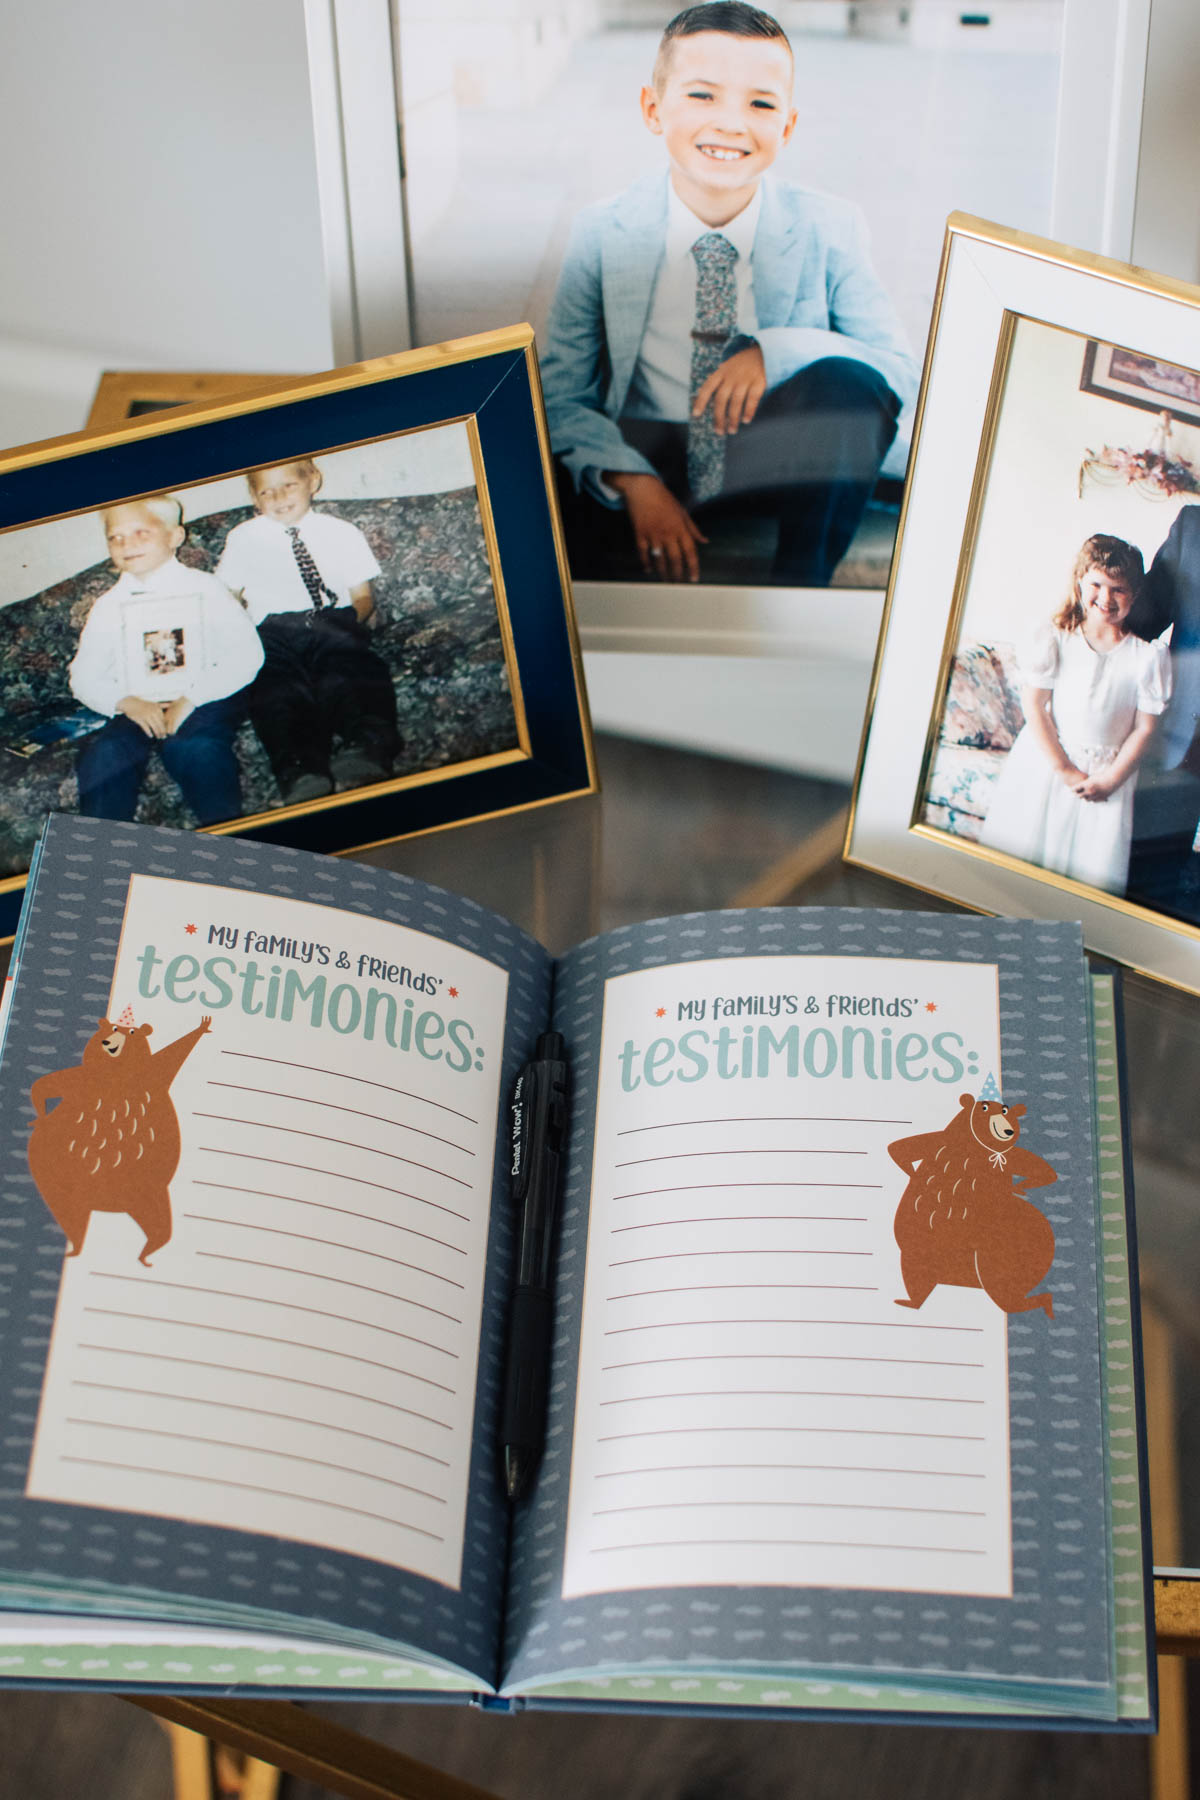 LDS baptism testimony book on table with three picture frames surrounding.